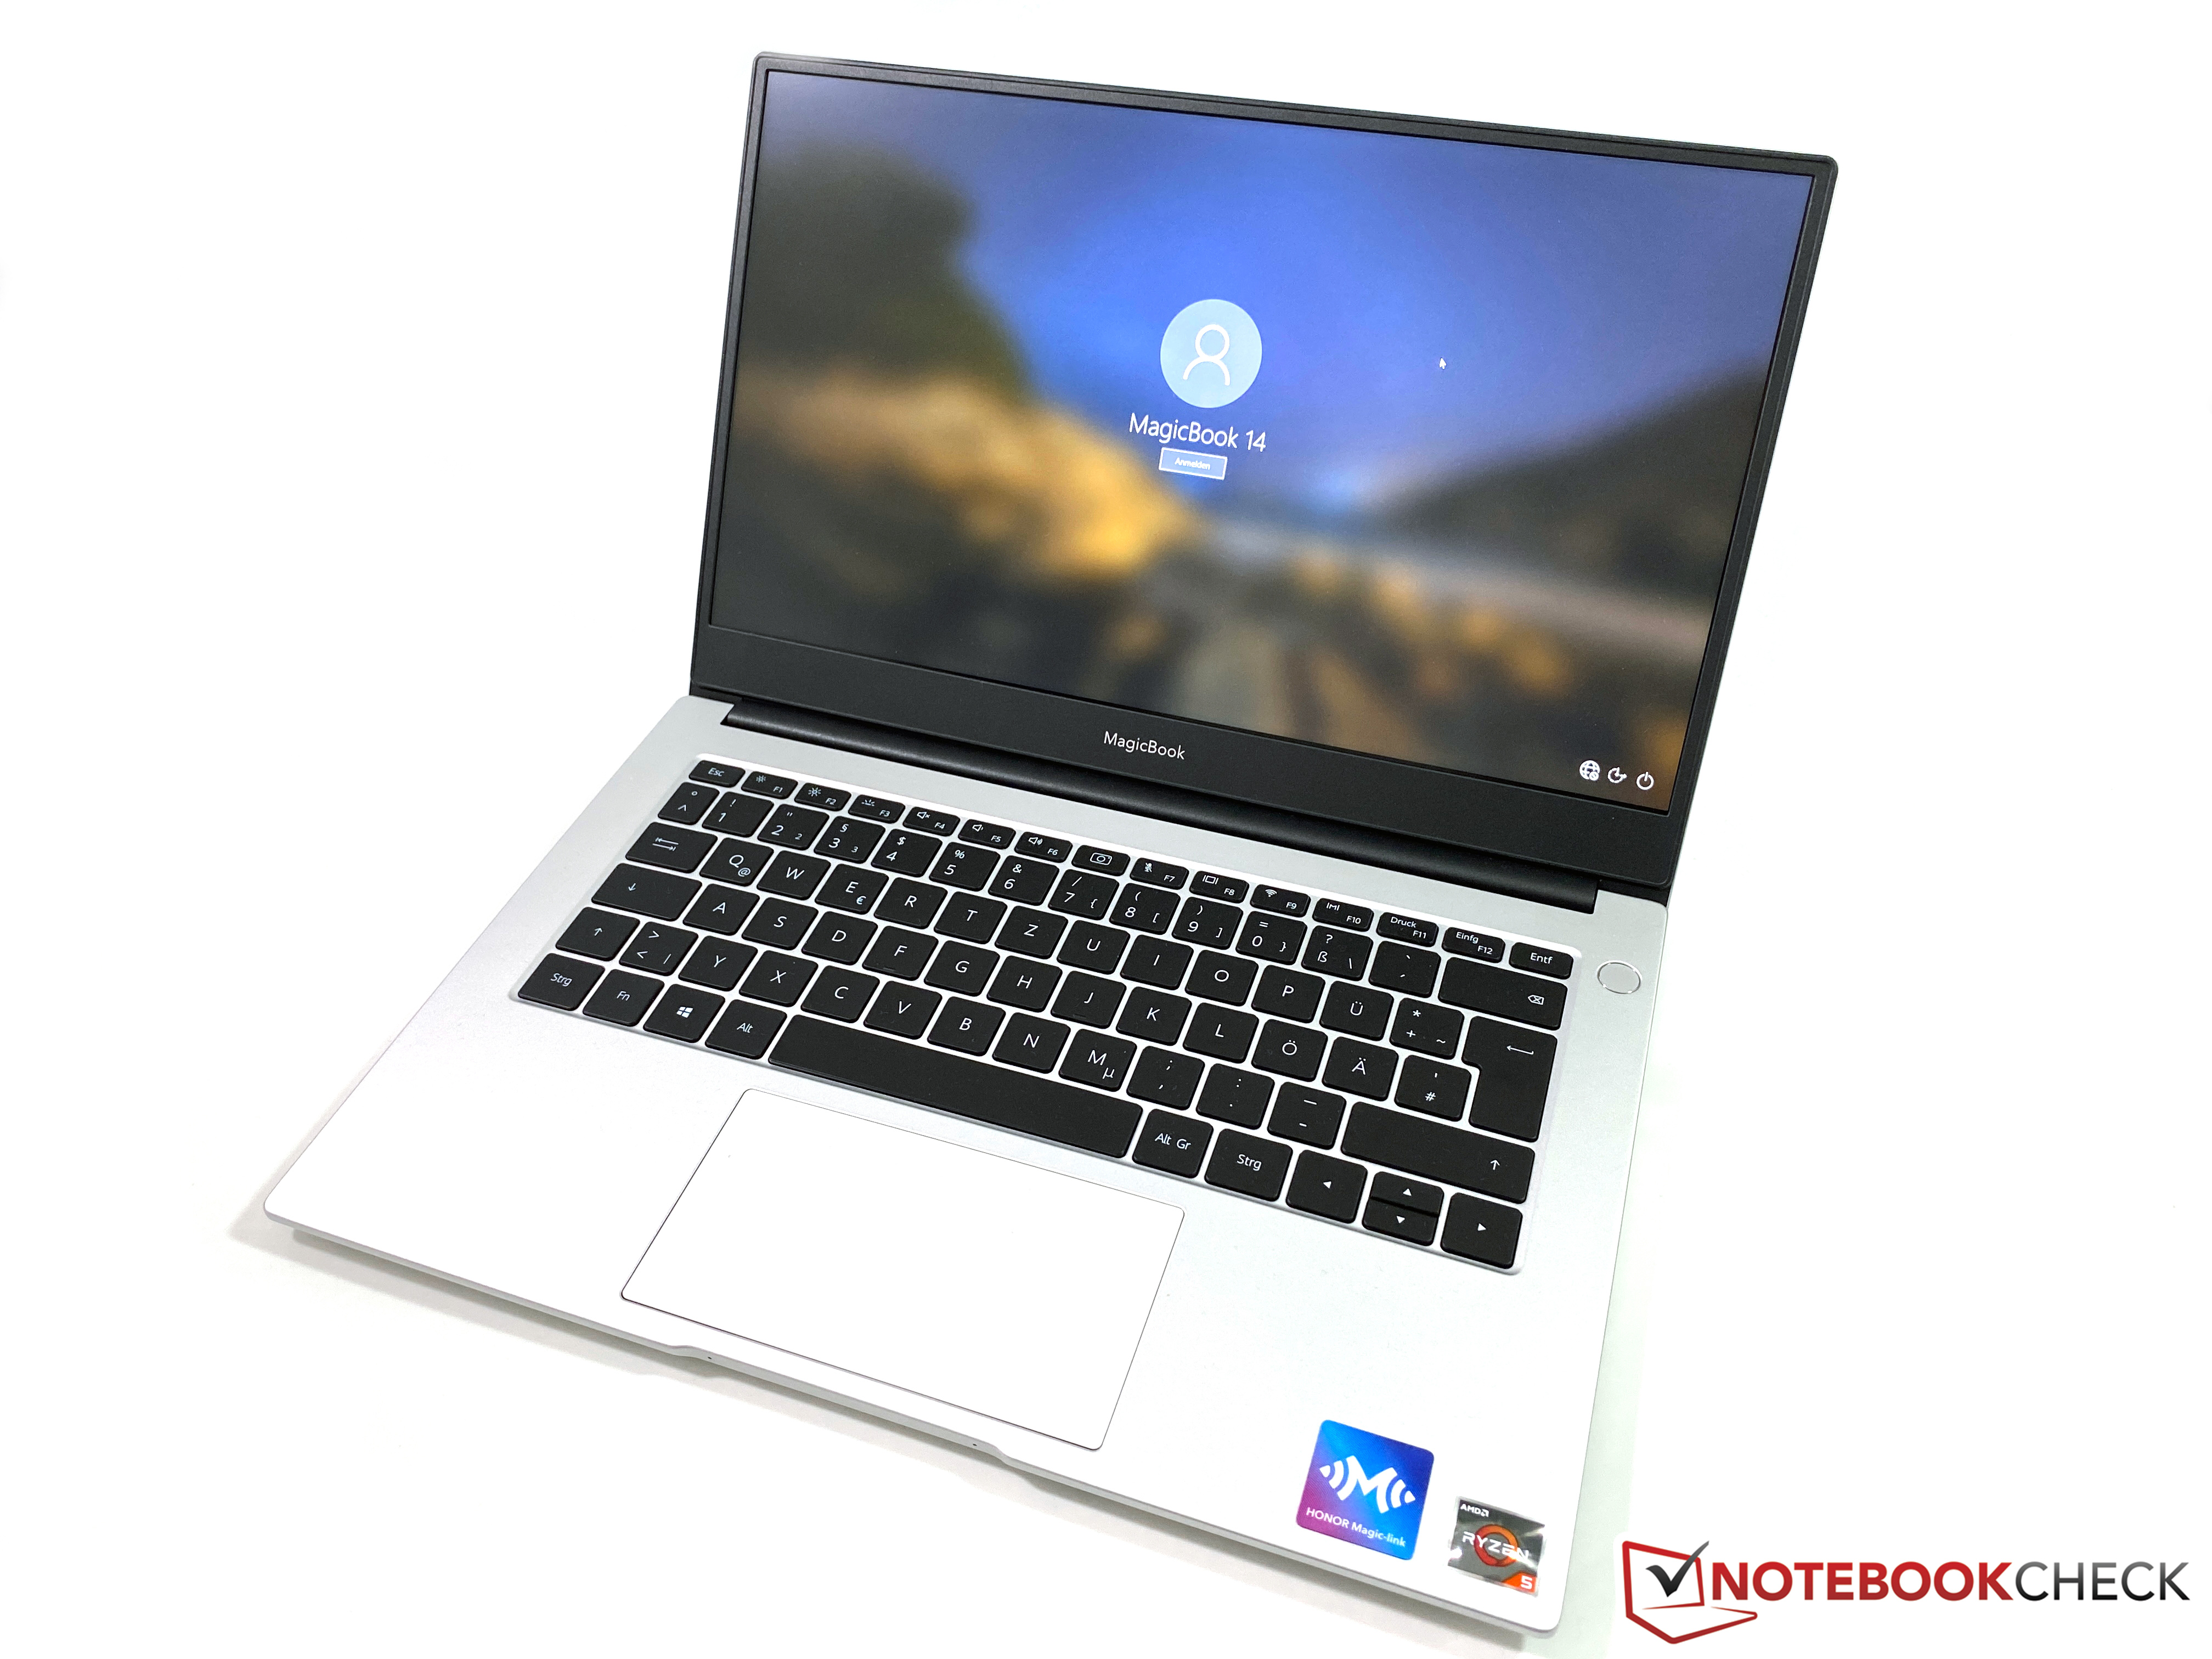 The Honor MagicBook 14 is the price-performance champion